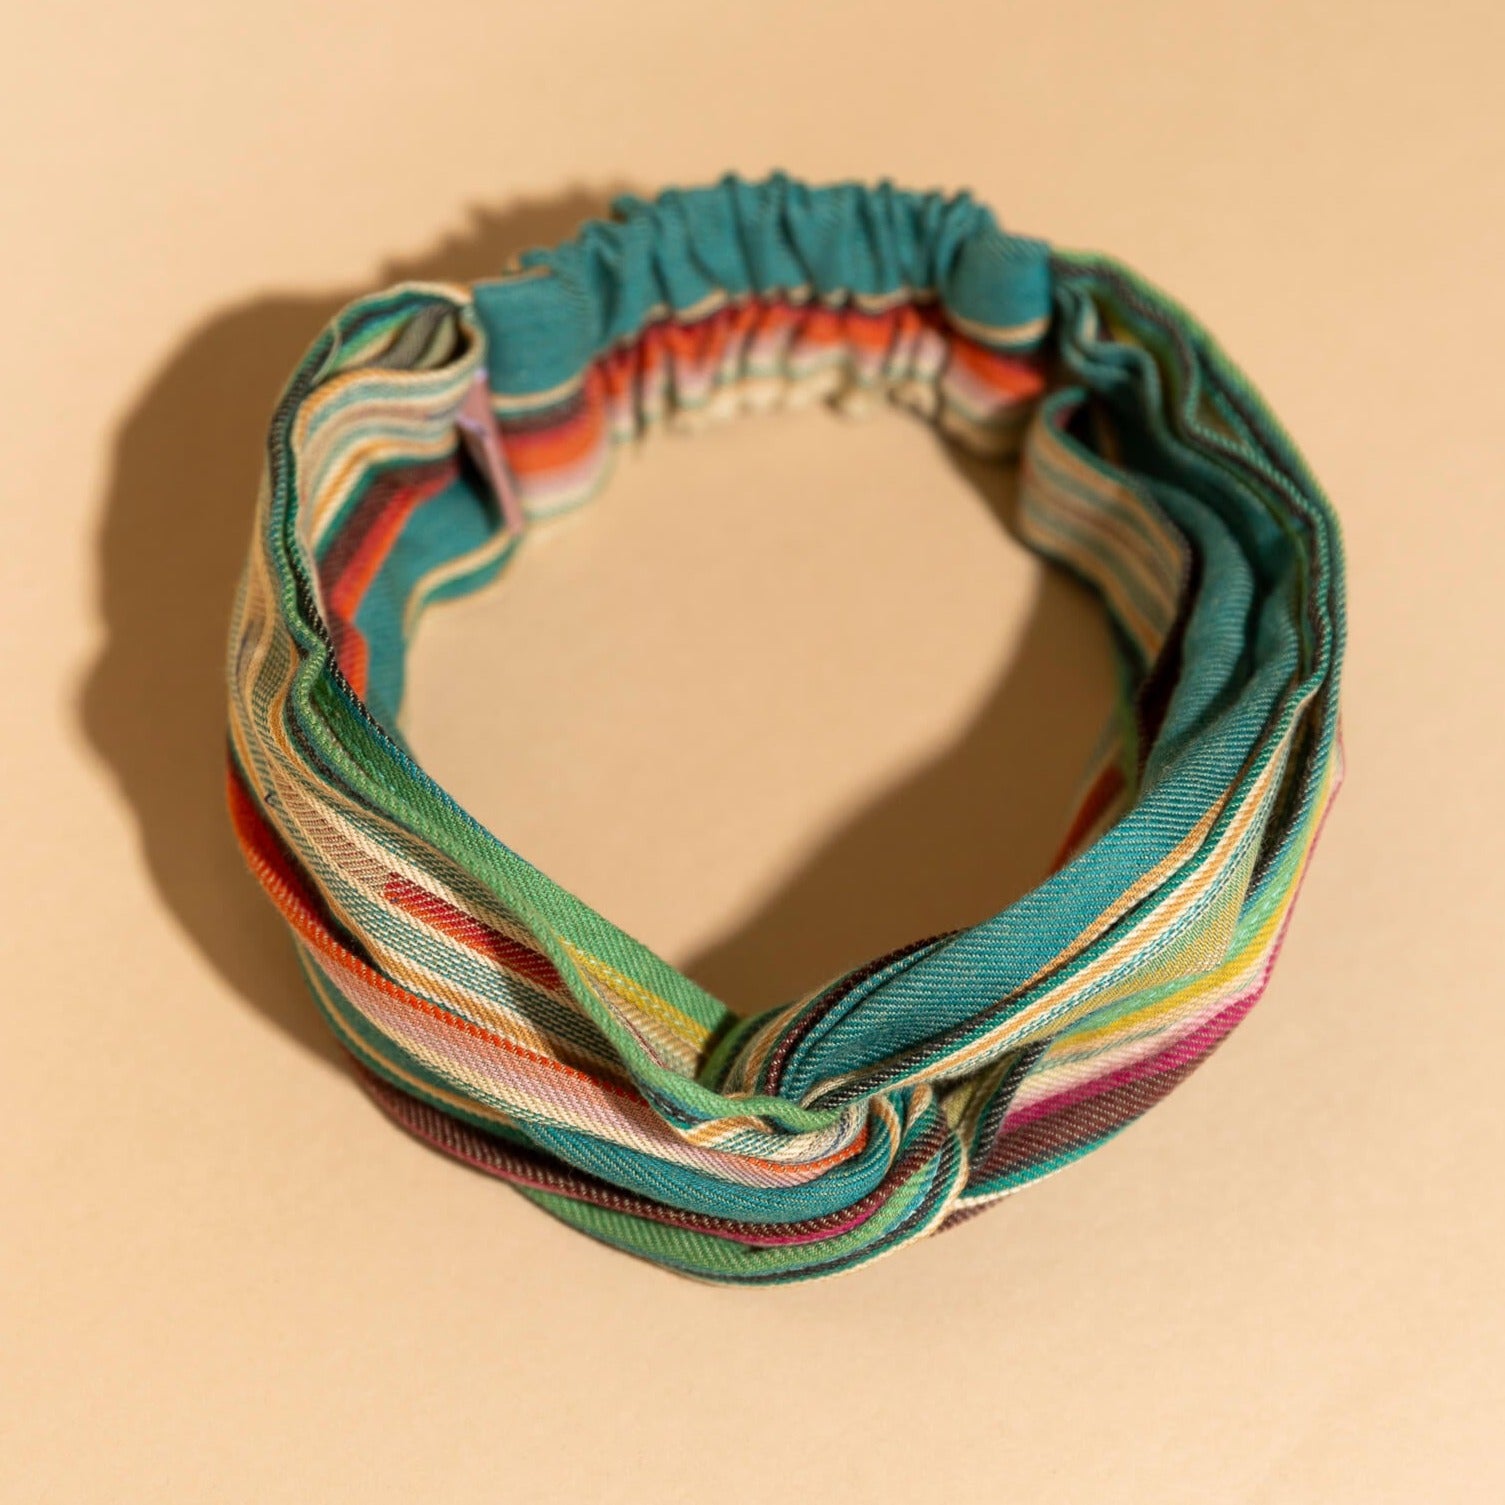 Show Thyme Stripes Woven Cotton Twisted Headband